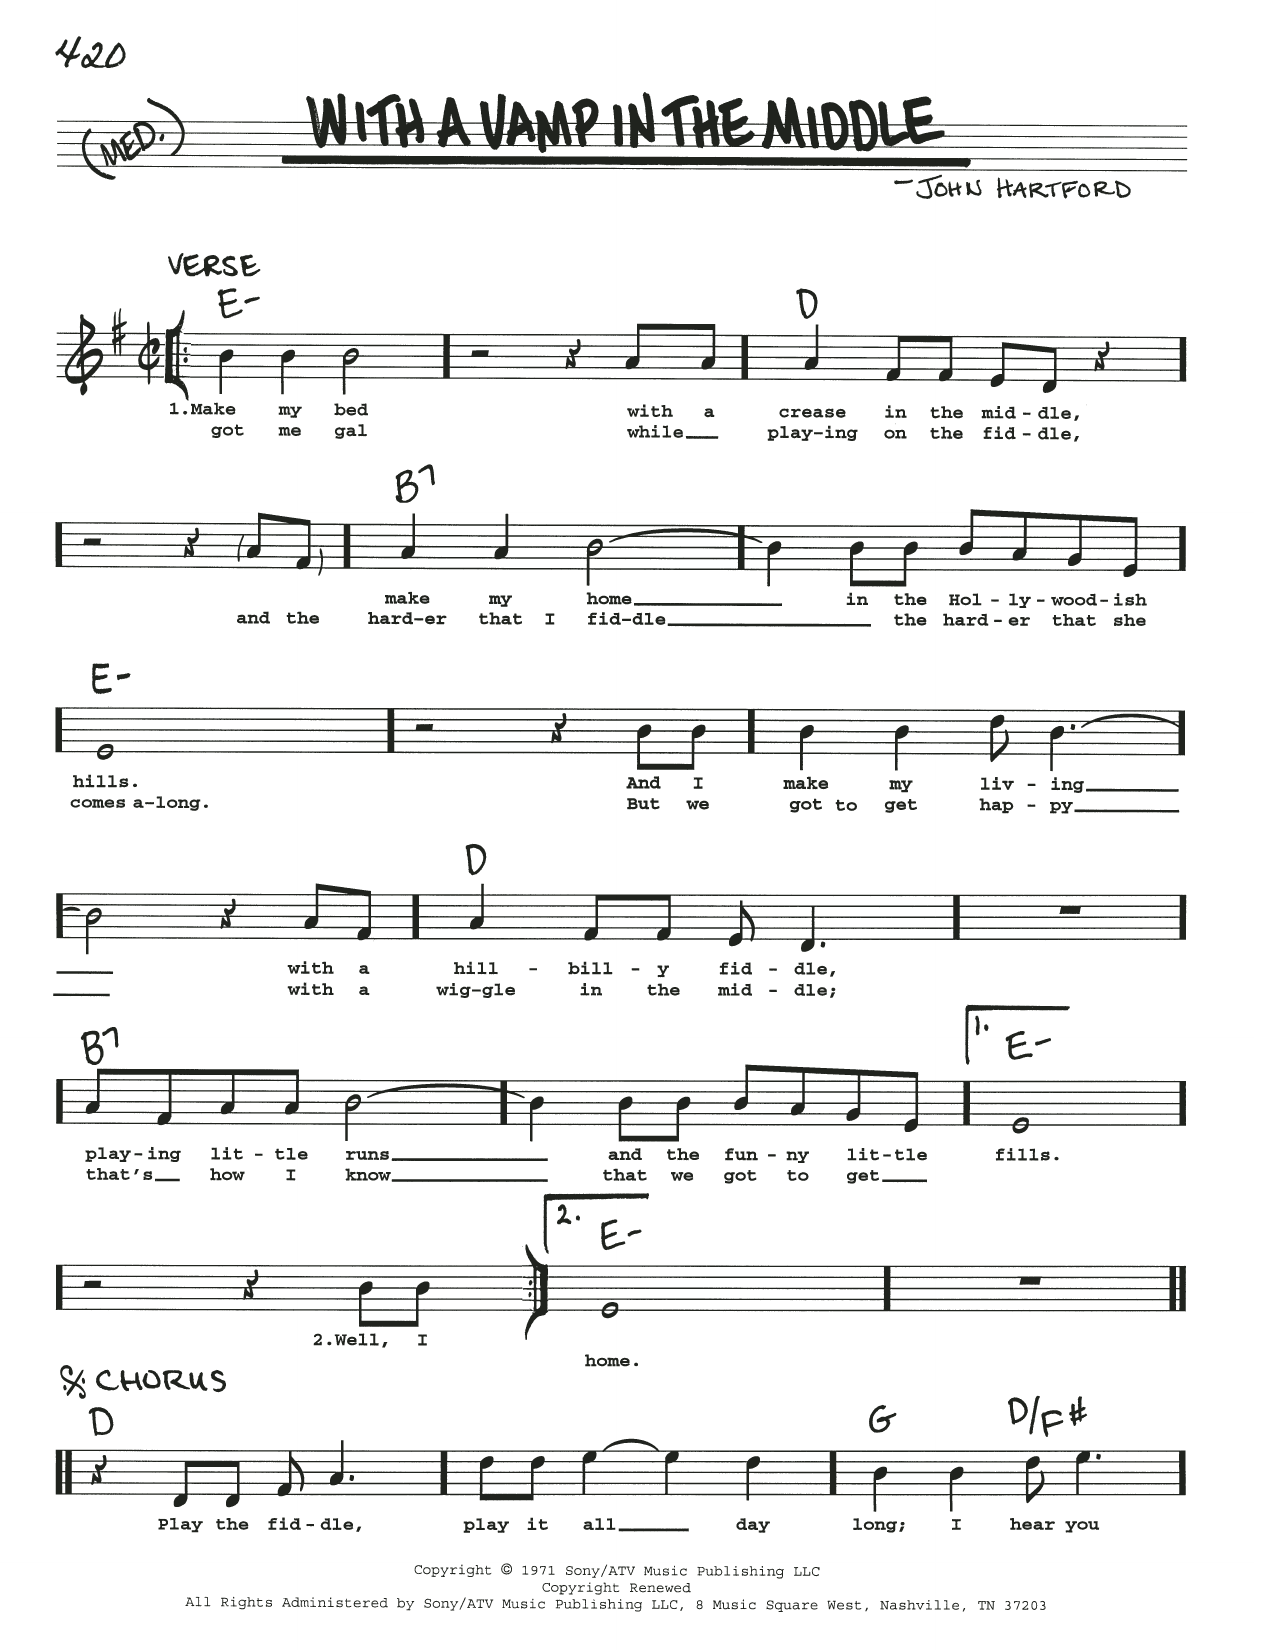 Download John Hartford With A Vamp In The Middle Sheet Music